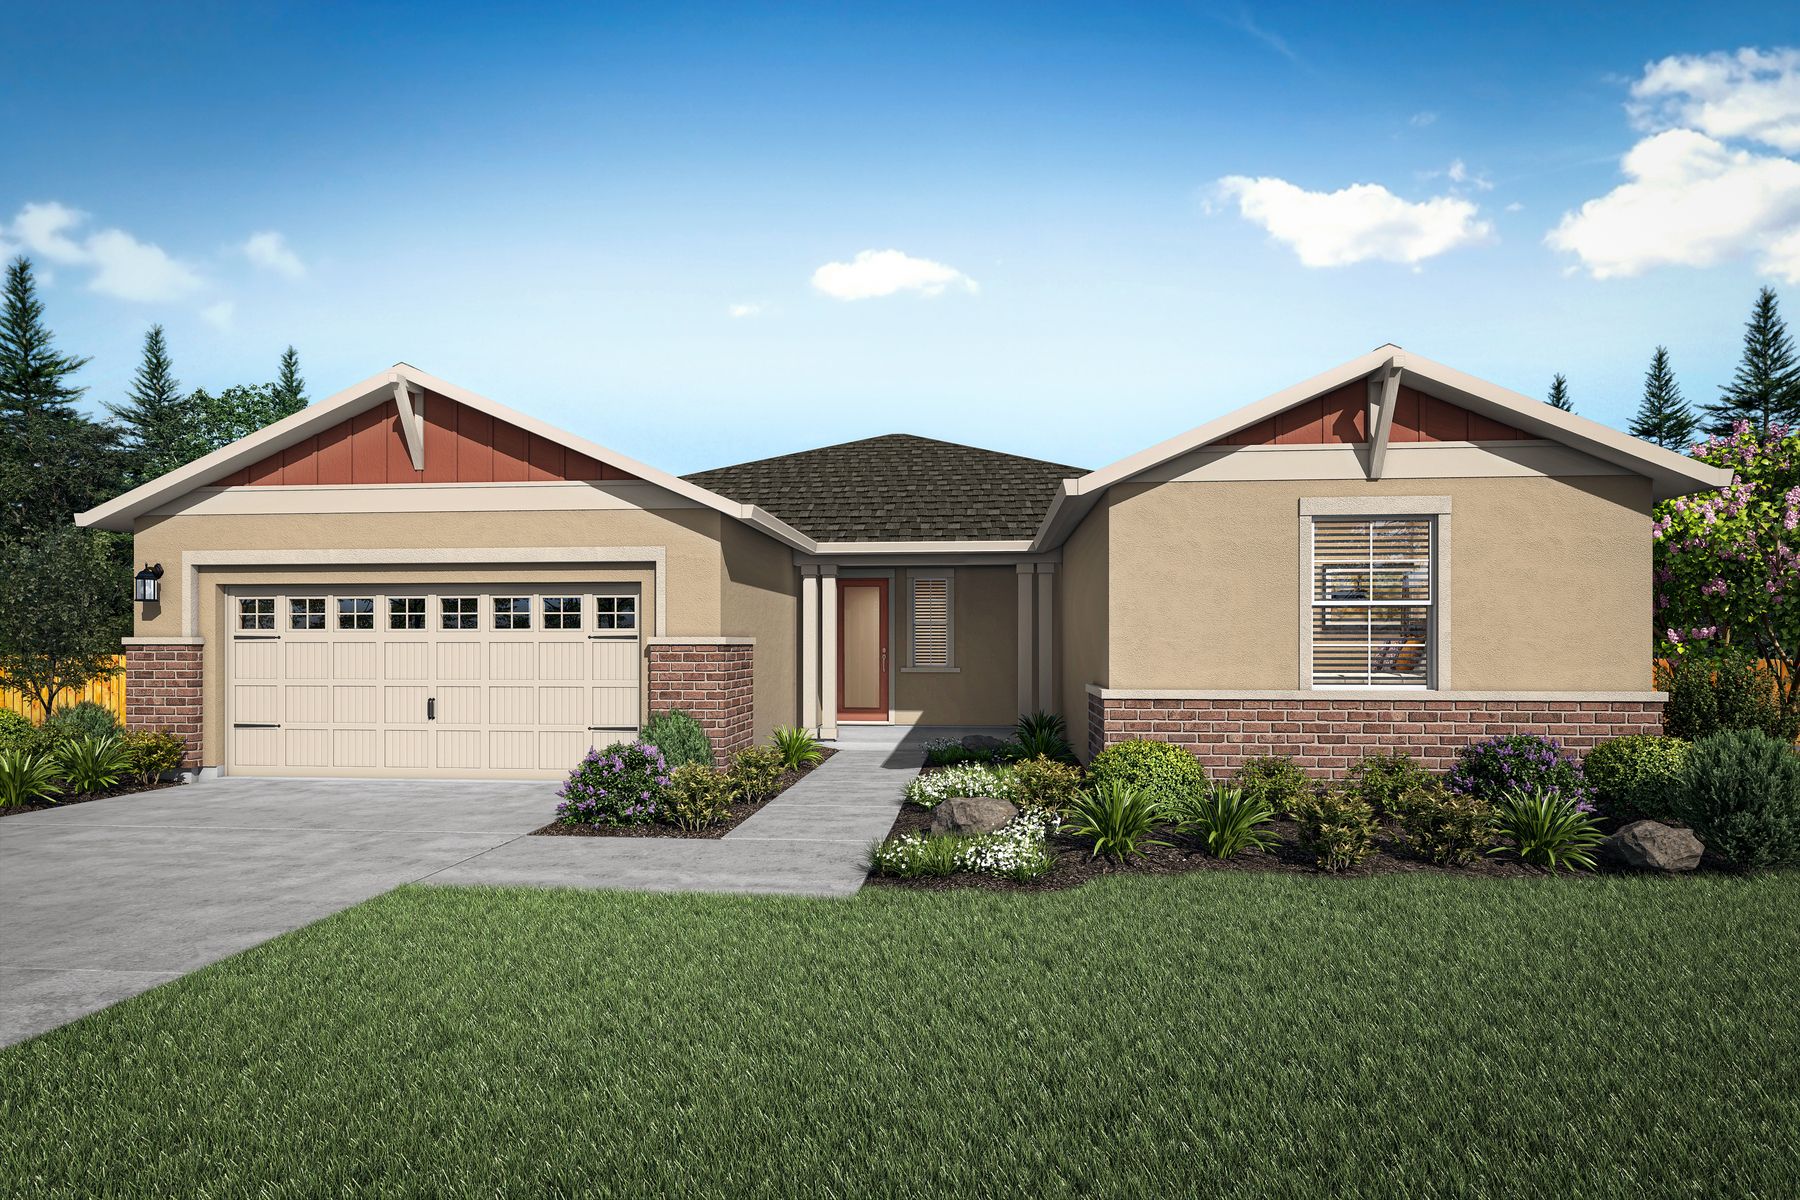 The Roosevelt Plan:The Roosevelt plan offers an incredible layout with three bedrooms and two baths.